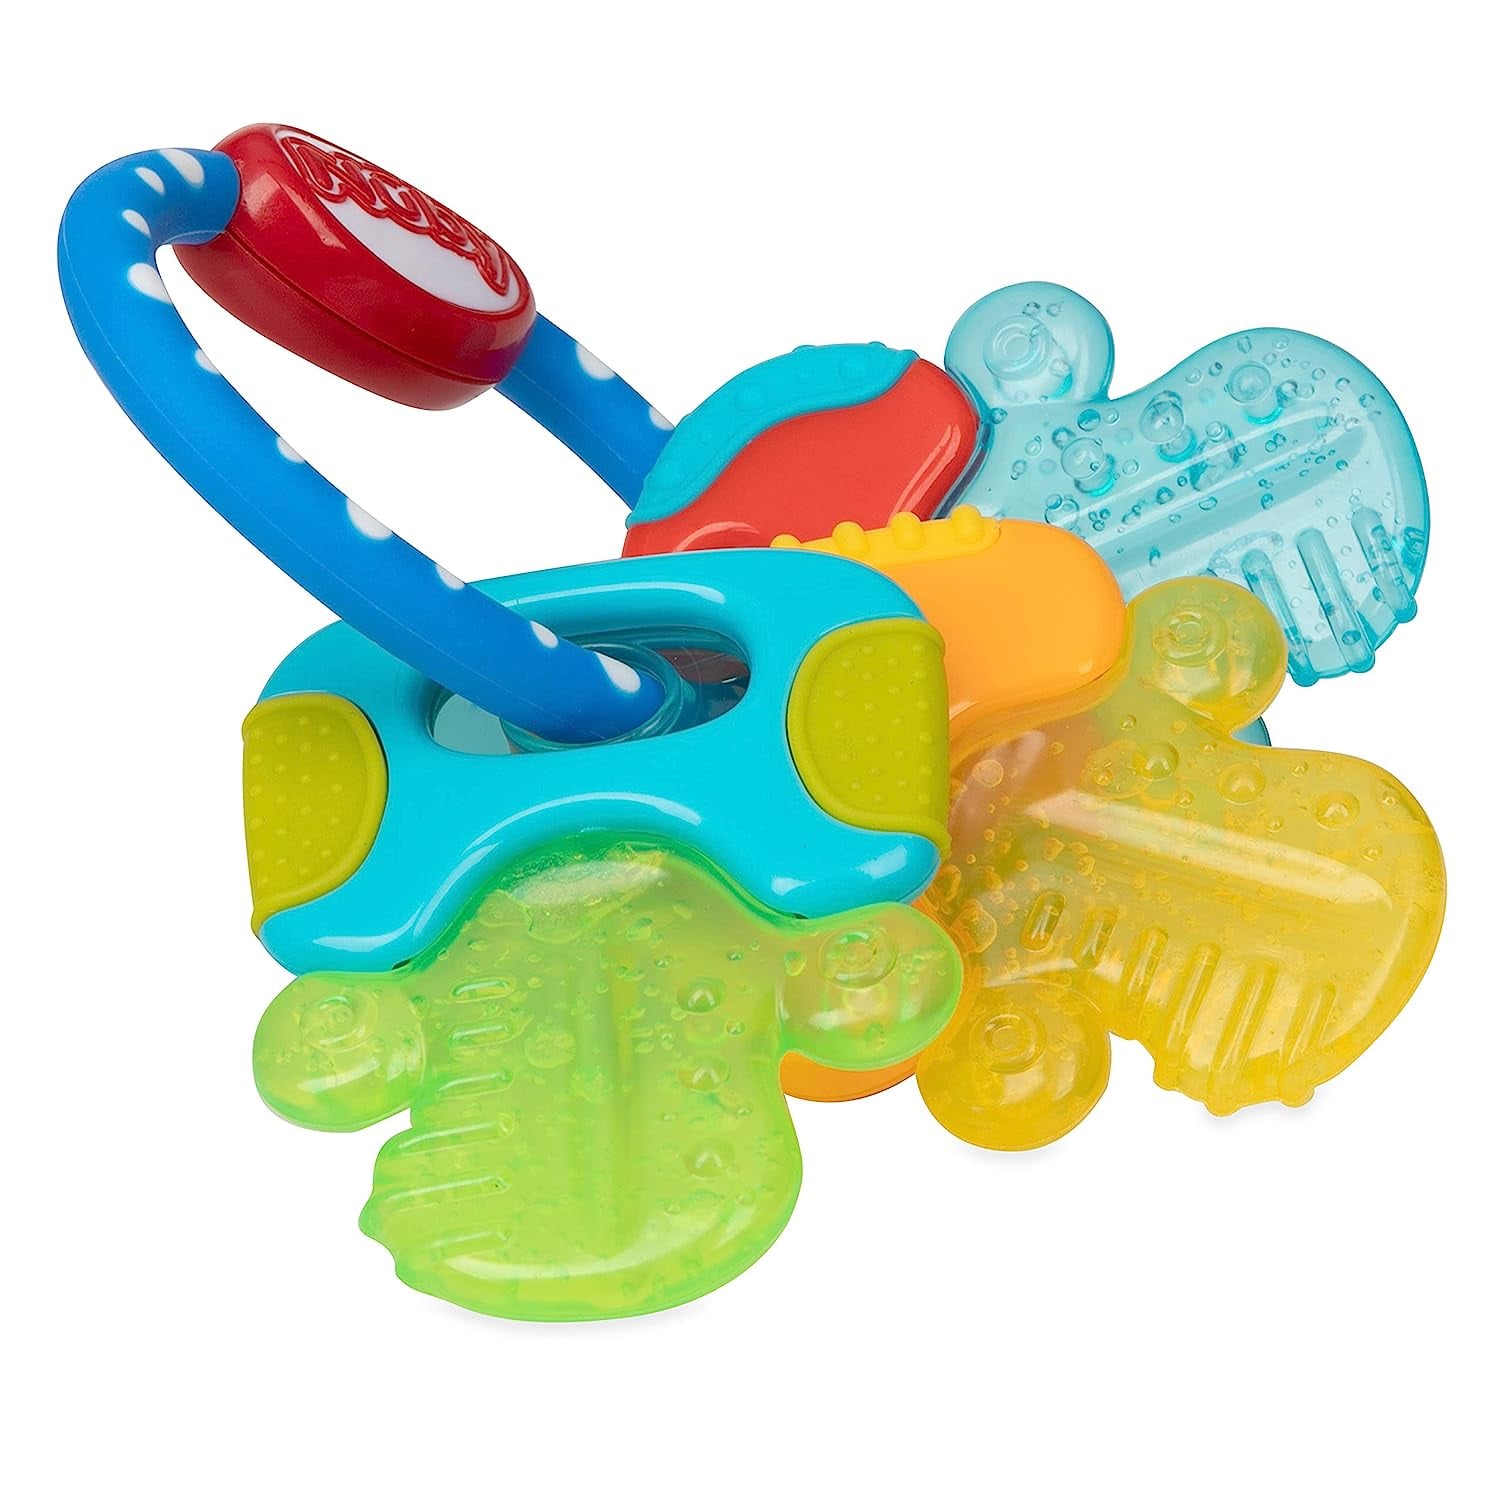 Best teething toys 2023: Sensory teethers for babies and toddlers